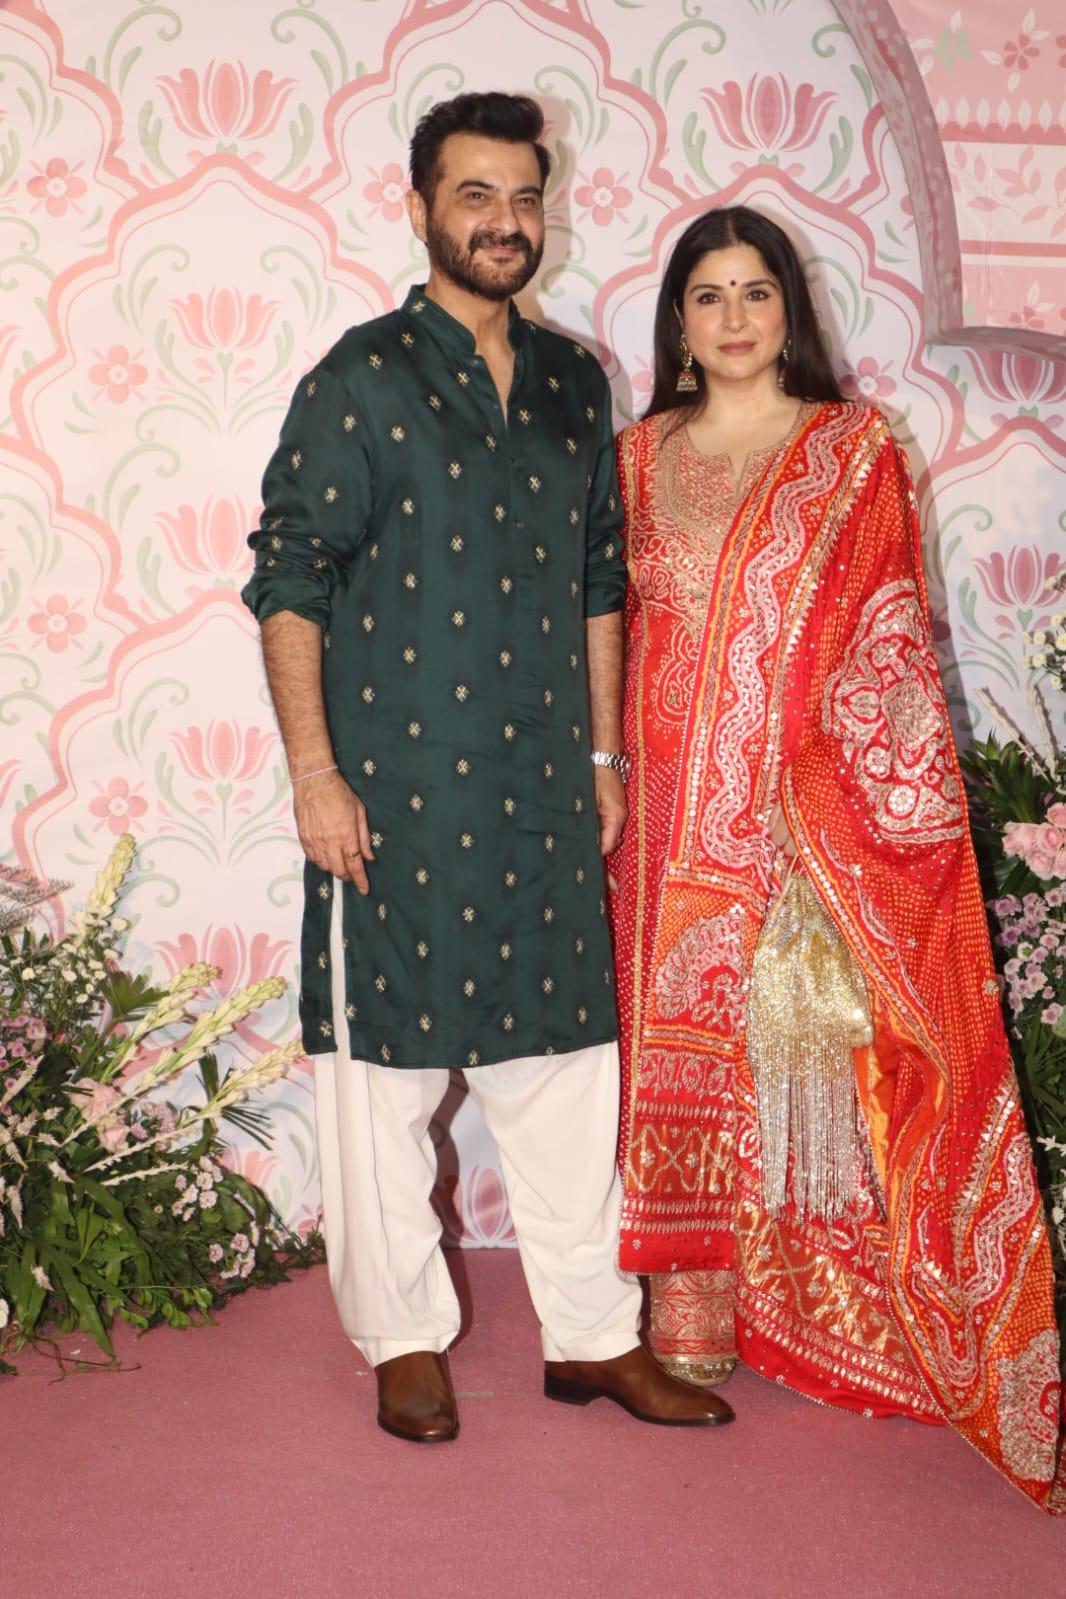 Sanjay and Maheep Kapoor showed up at the event looking adorable!